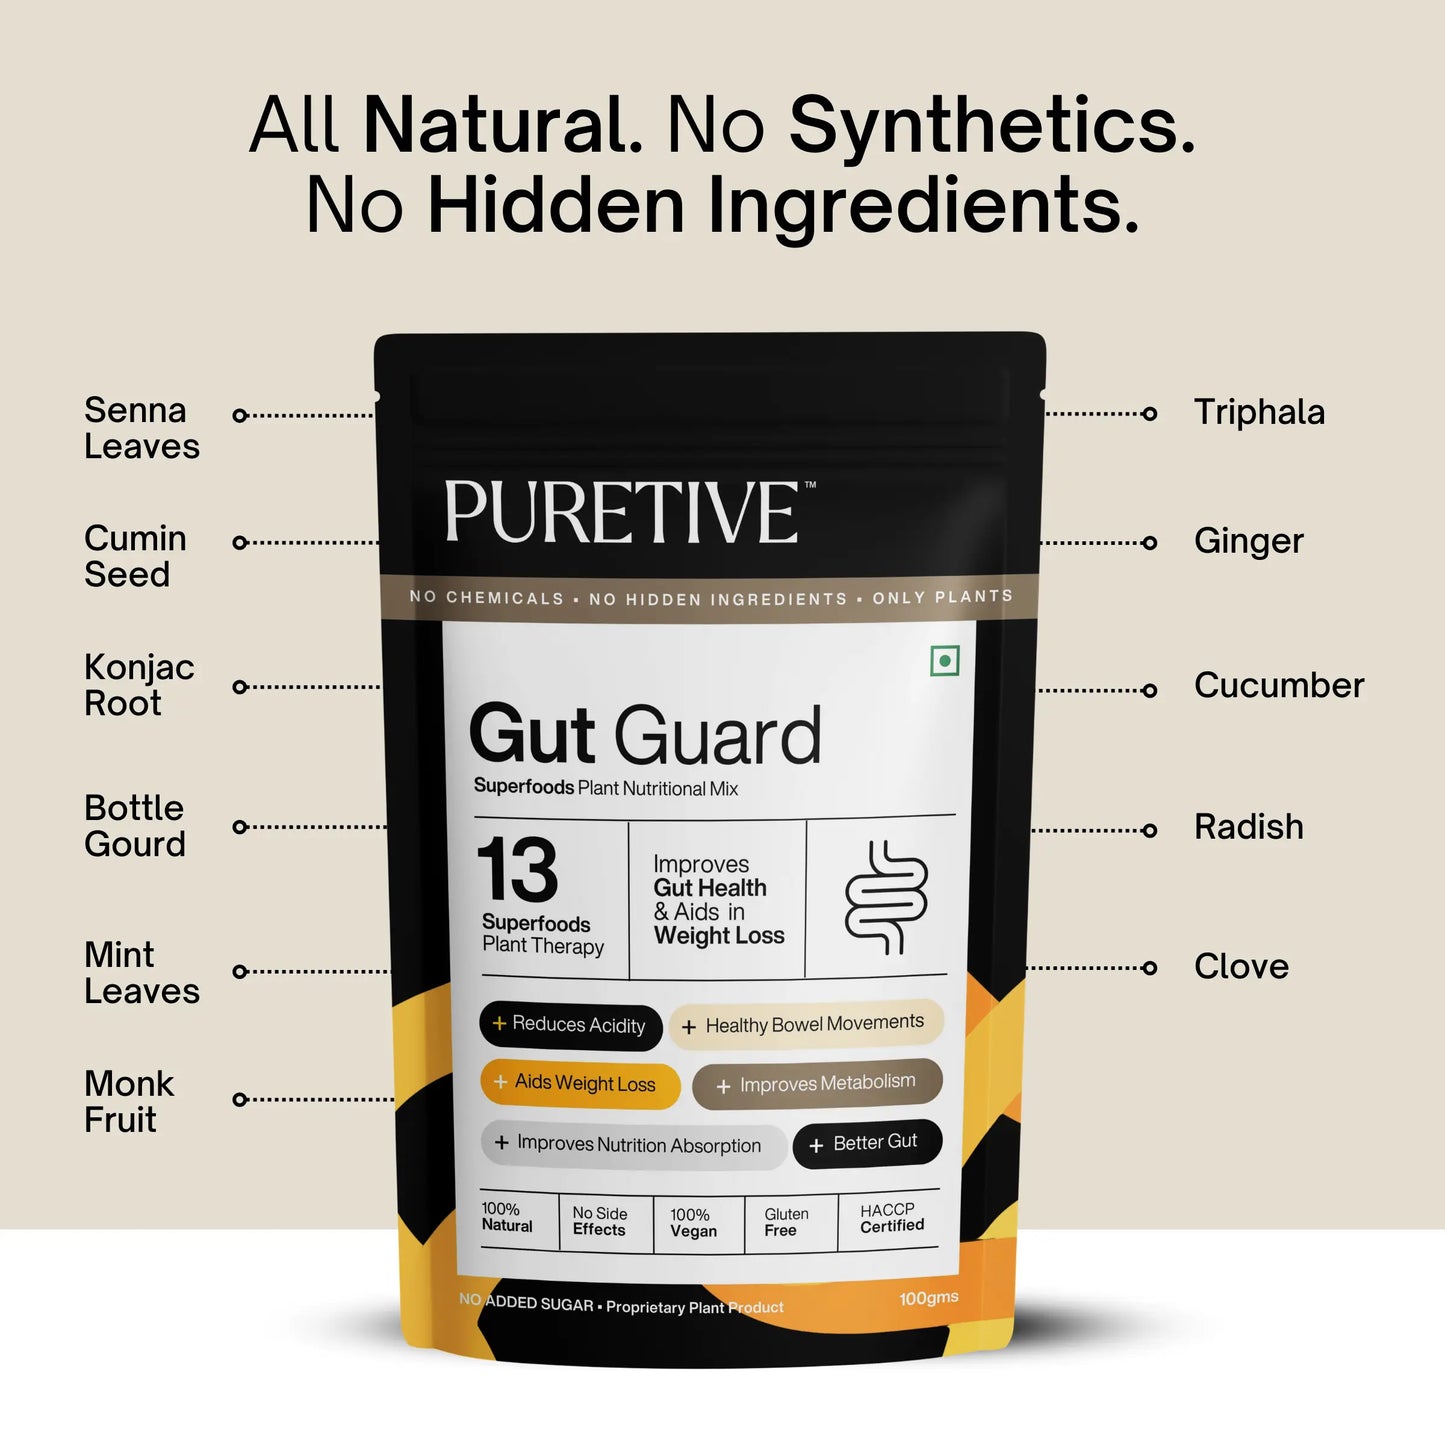 Picture of ingredients that goes in side Puretive's Gut Guard Nutrition Mix as we believe in Transparency. Puretive's Gut Guard Nutrition Mix comes is a 100% Pure blend of Senna leaves, Cumin seed, konjac root, bottle gourd, mint leaves, monk fruit, triphala, ginger, cucumber, radish & Clove